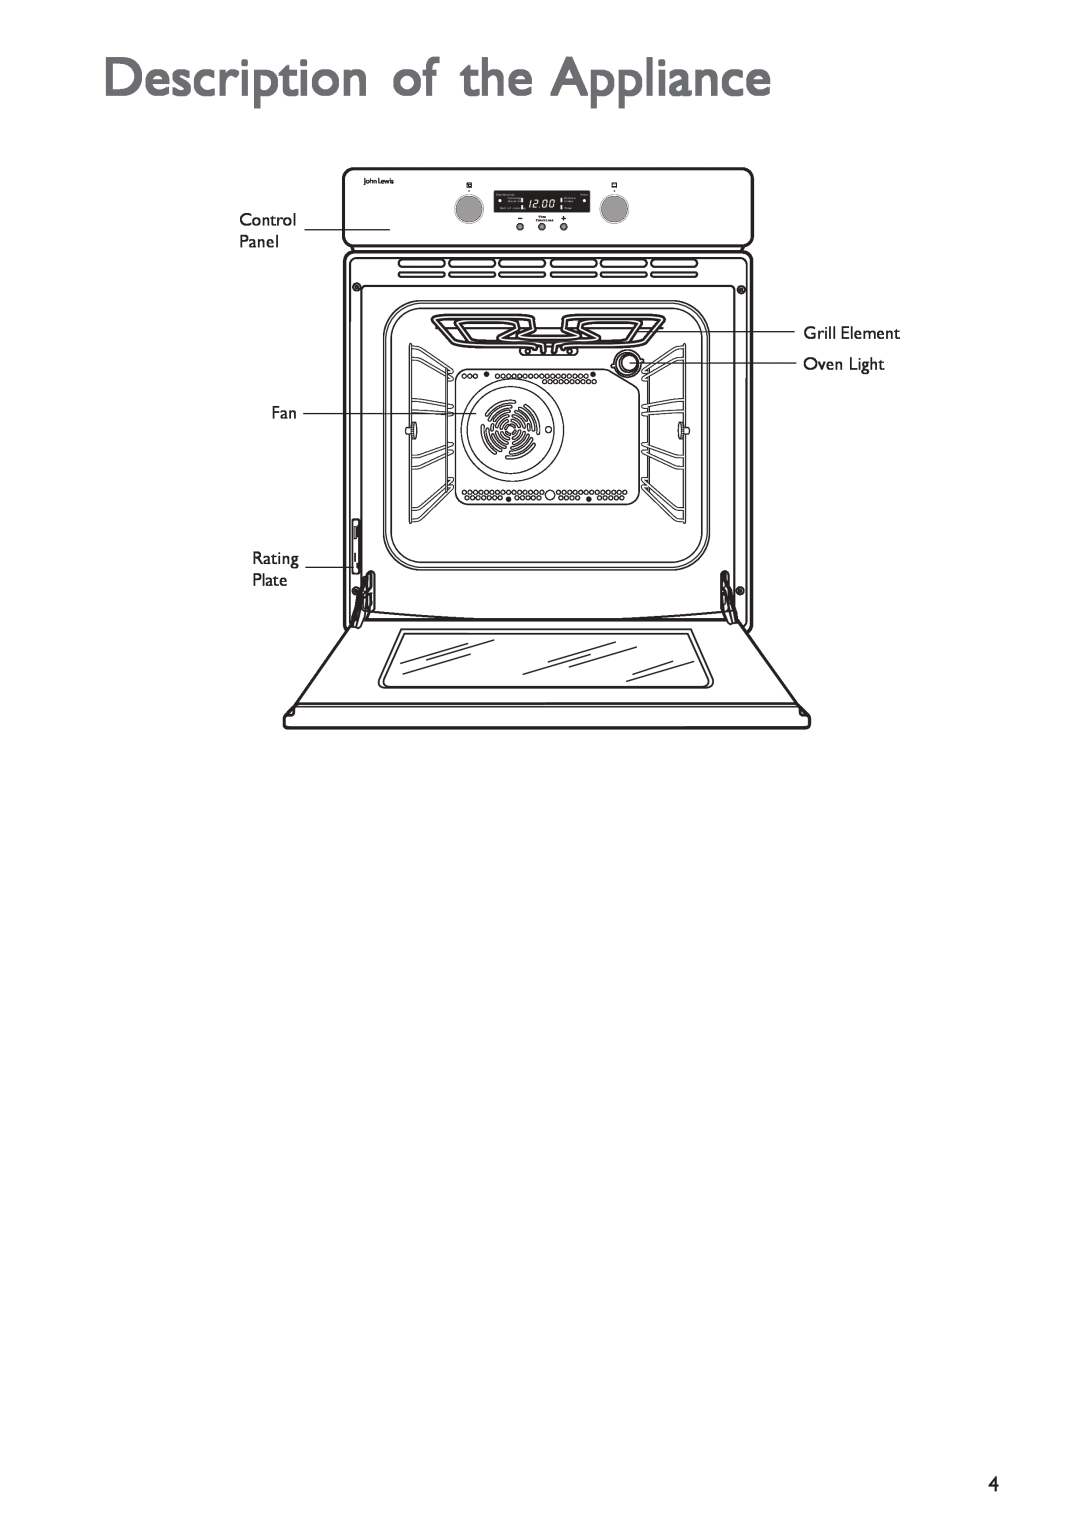 John Lewis JLBIOS601 Description of the Appliance, Thermostat, Oven, Cooking, Minute, duration, timer, End of cooking 